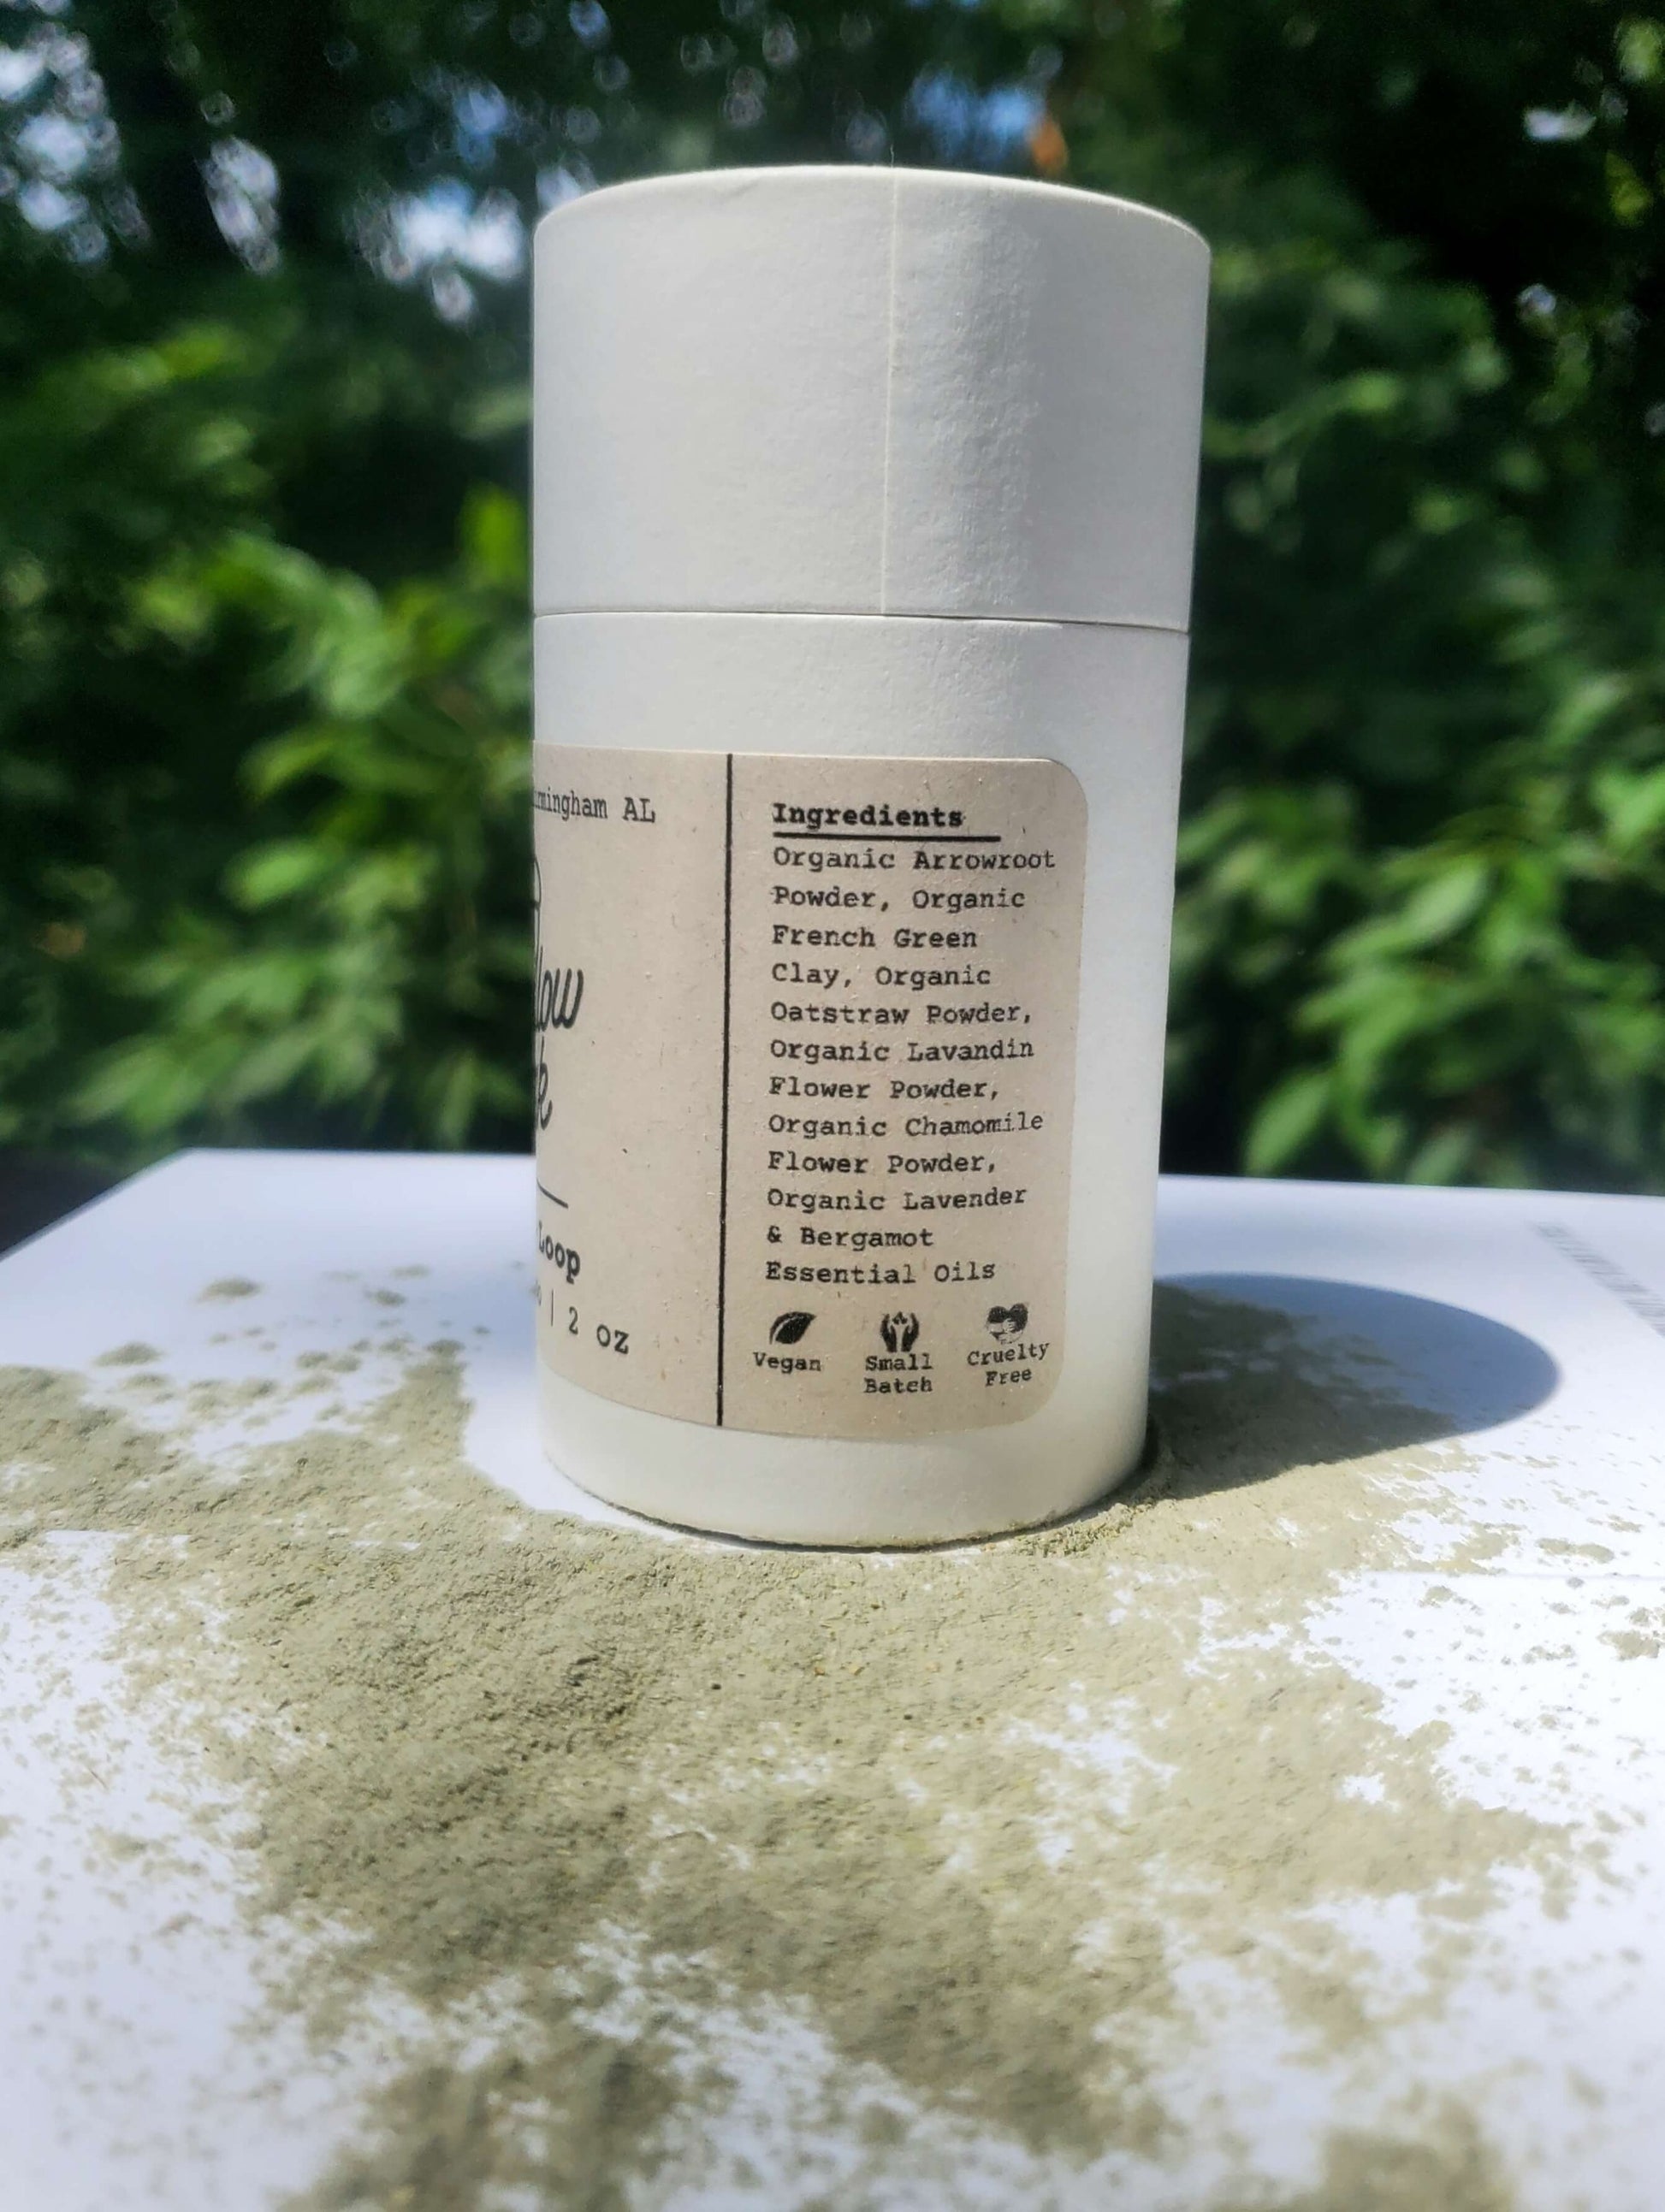 Ingredient list for mellow oak organic dry shampoo. The dry shampoo comes in powder form.